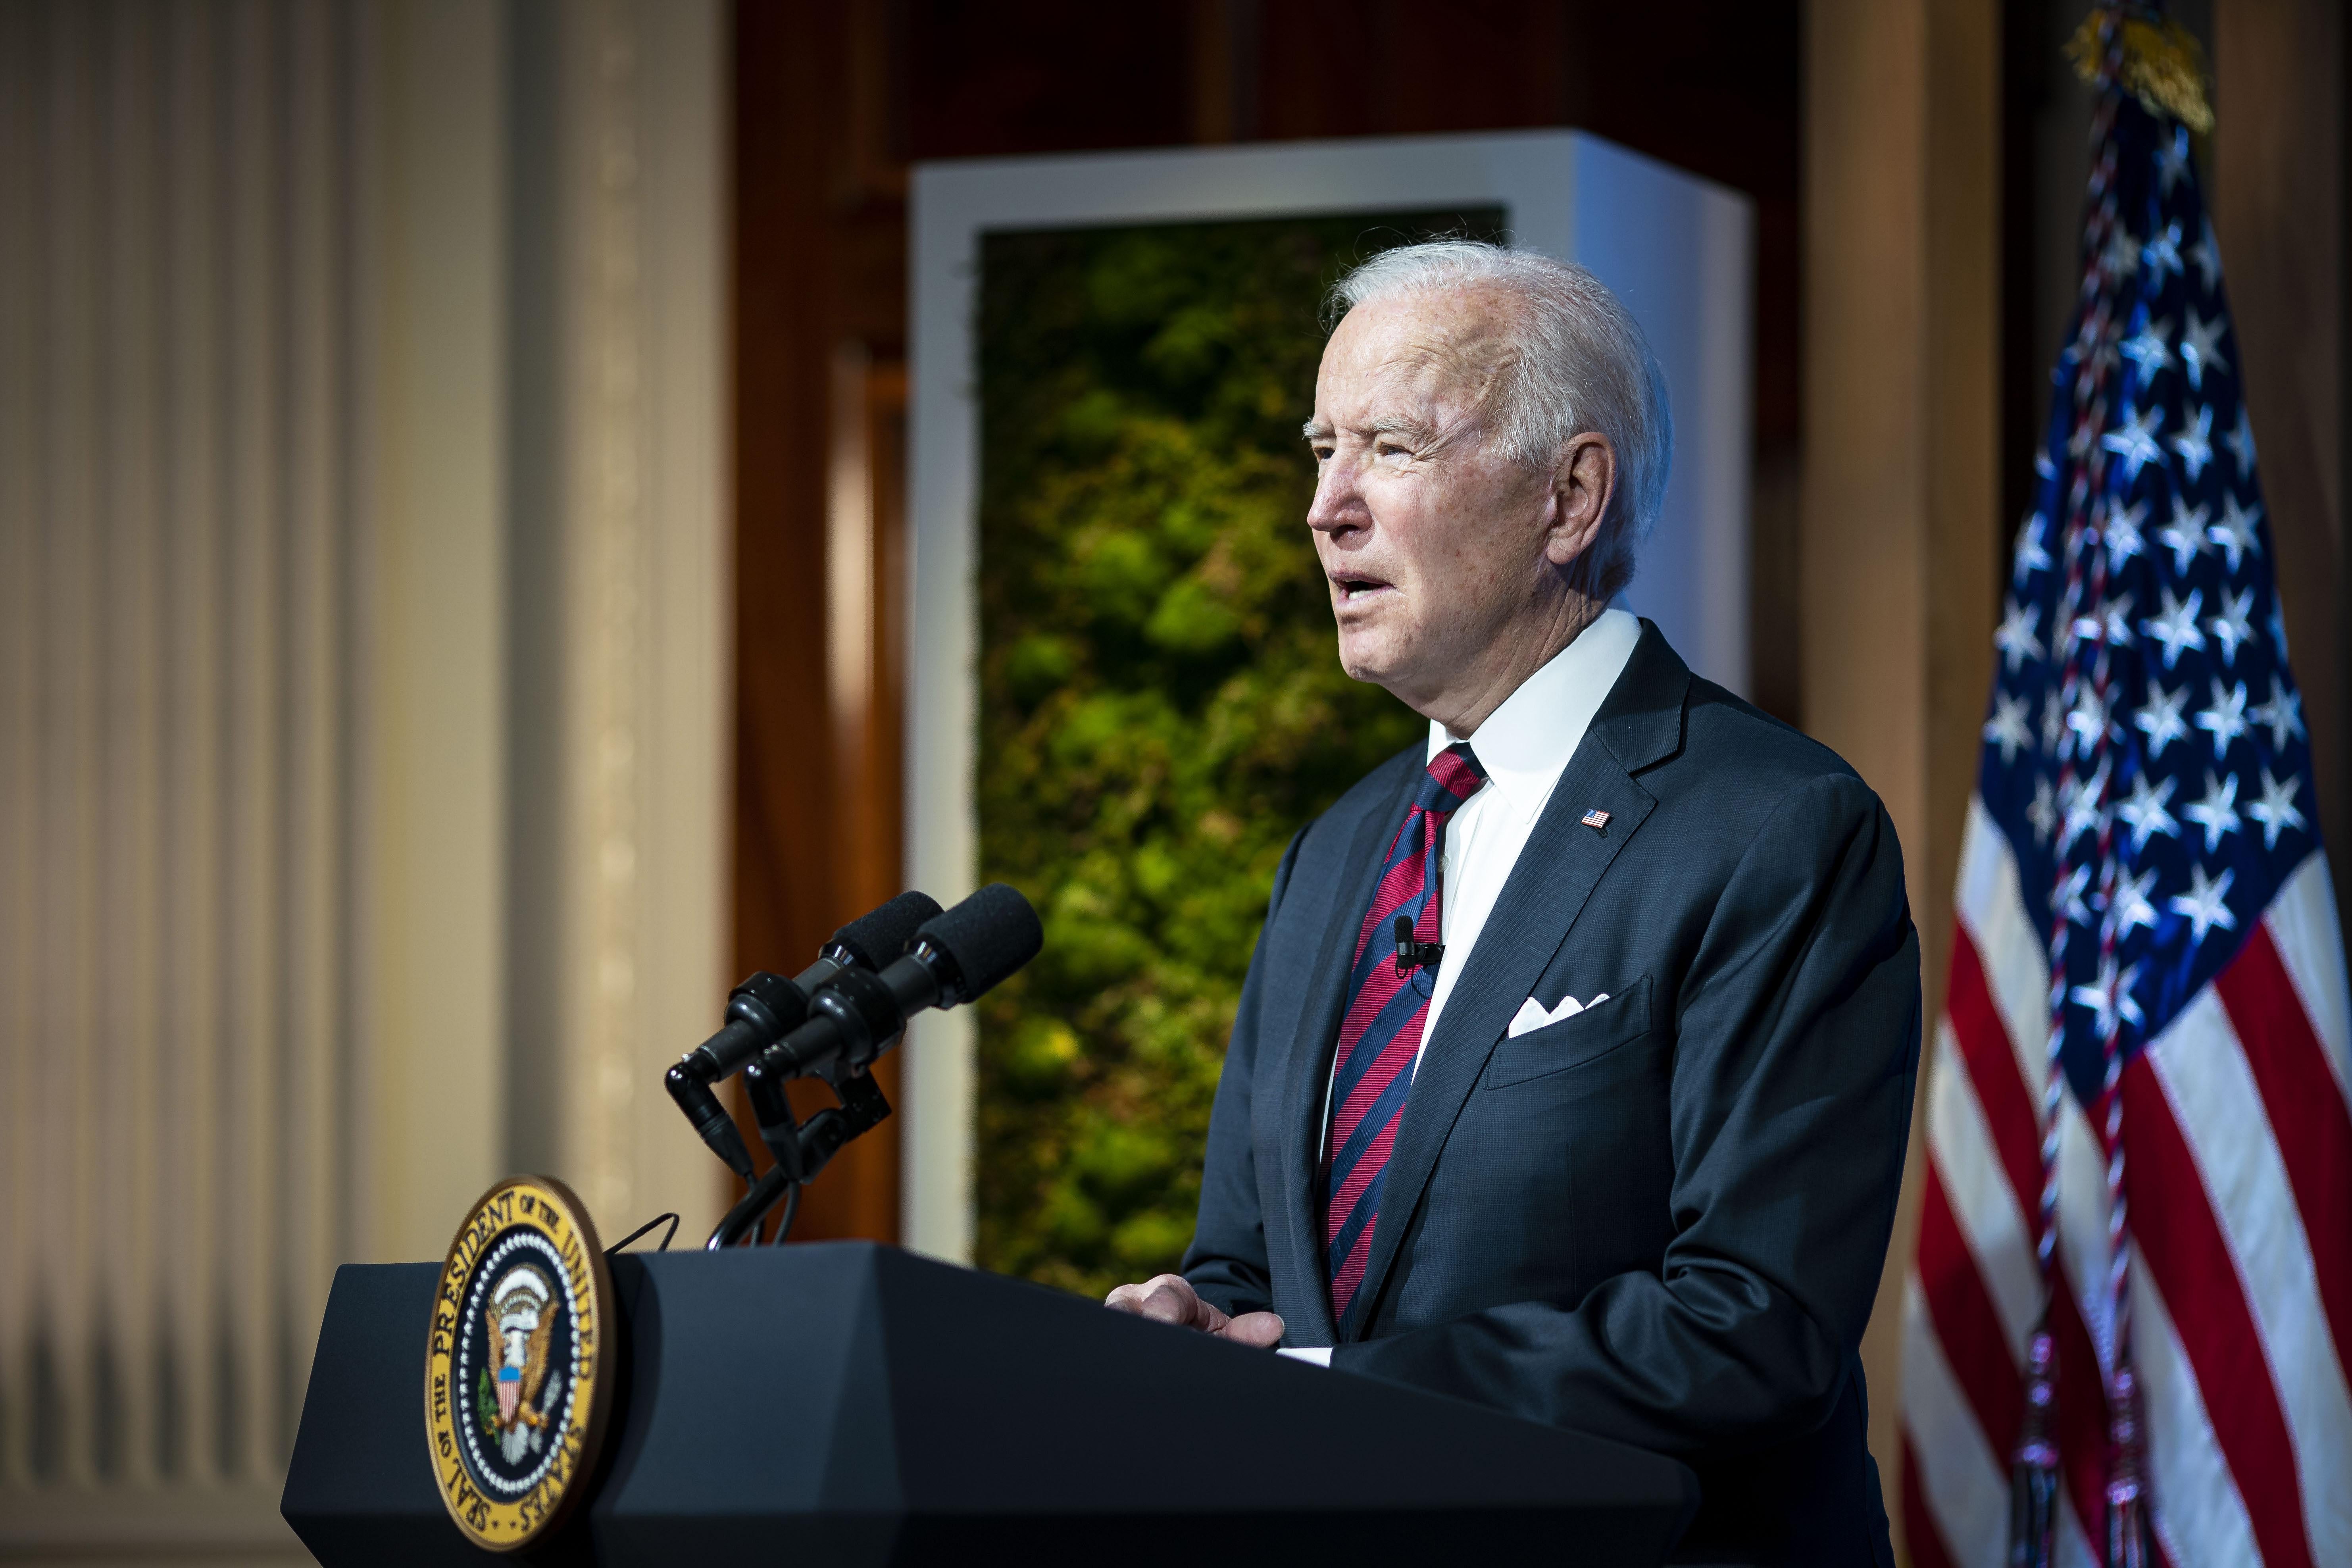 WASHINGTON, DC - APRIL 22: U.S. President Joe Biden delivers remarks during a virtual Leaders Summit on Climate with 40 world leaders at the East Room of the White House April 22, 2021 in Washington, DC. President pledged to cut greenhouse gas emissions by half by 2030. (Photo by Al Drago-Pool/Getty Images)